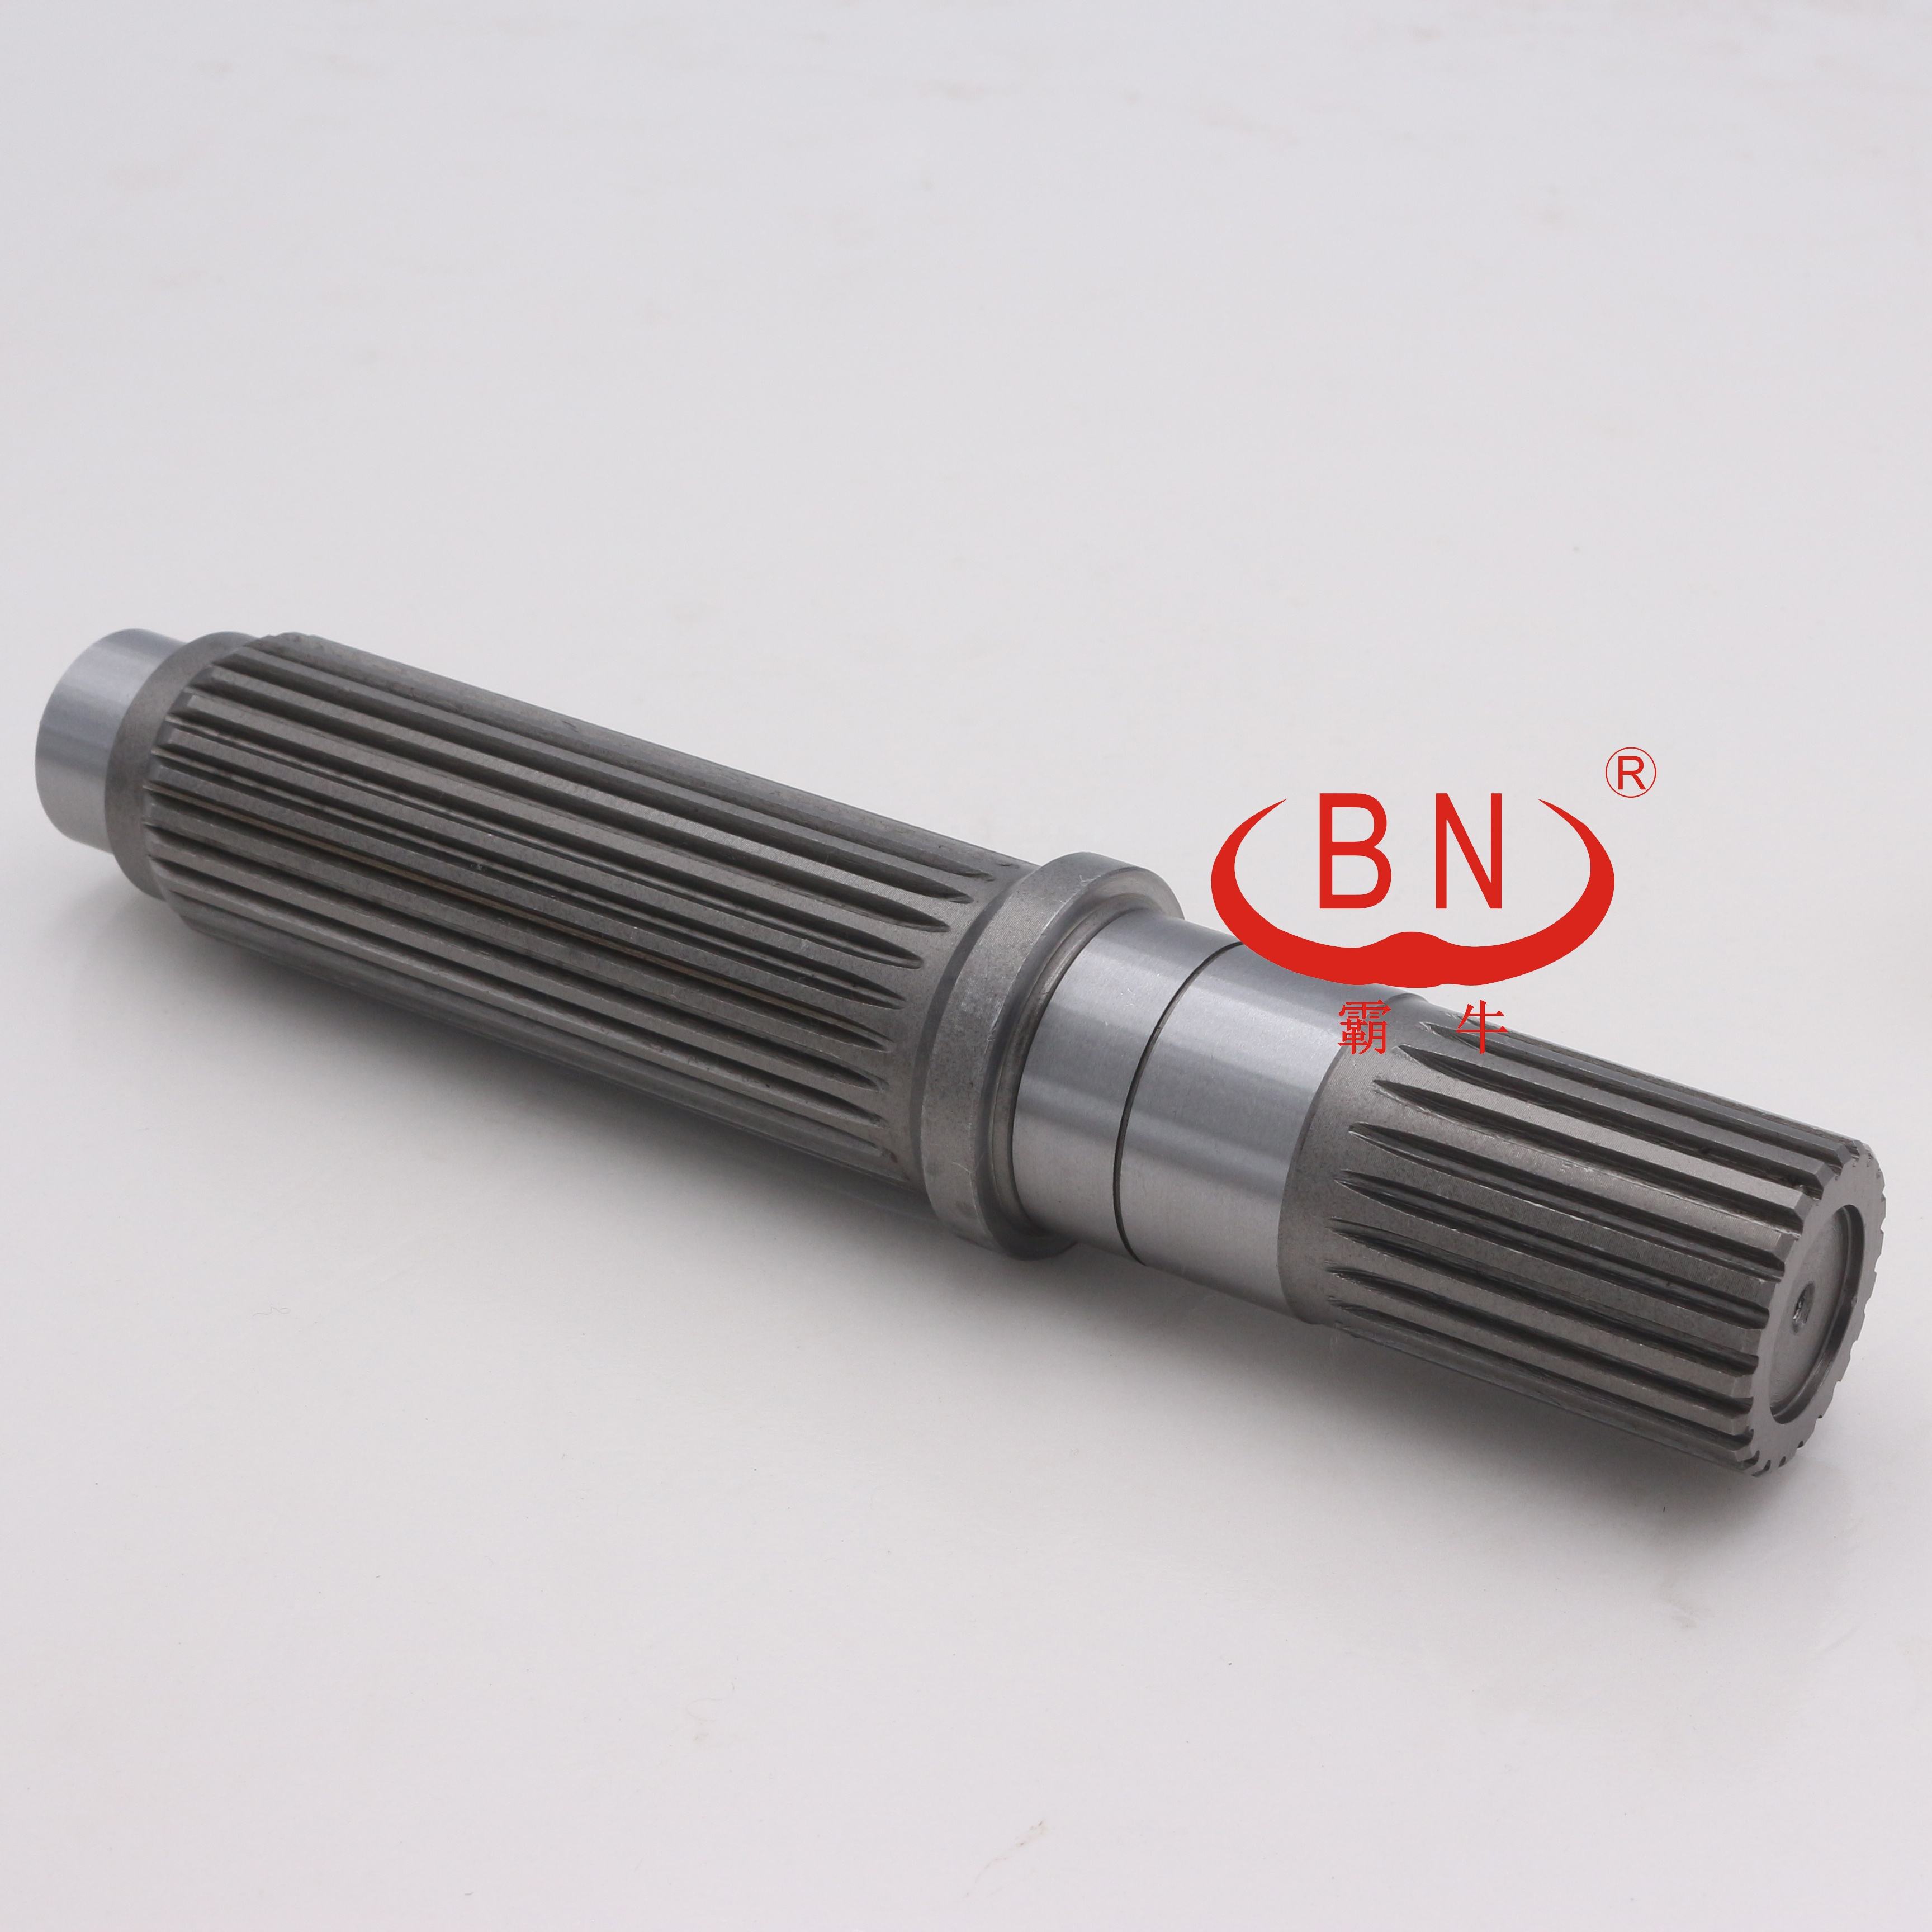 S280F2 Excavator Machinery Reduction Drive Shaft for Sumitomo S280F2